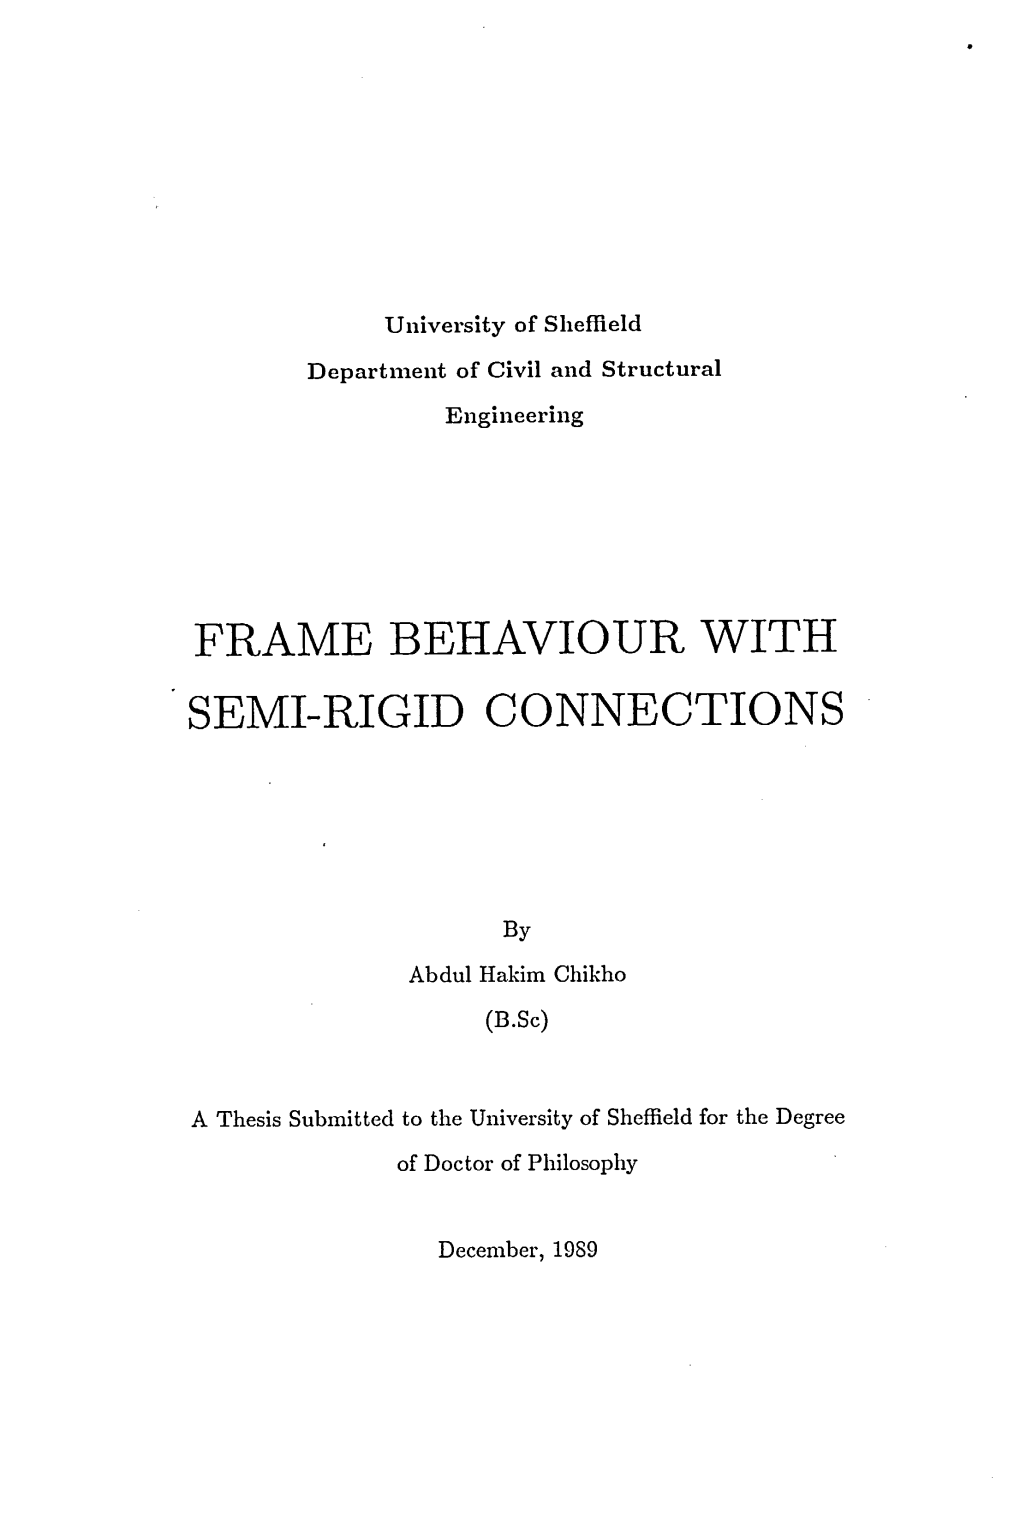 Frame Behaviour with Semi-Rigid Connections